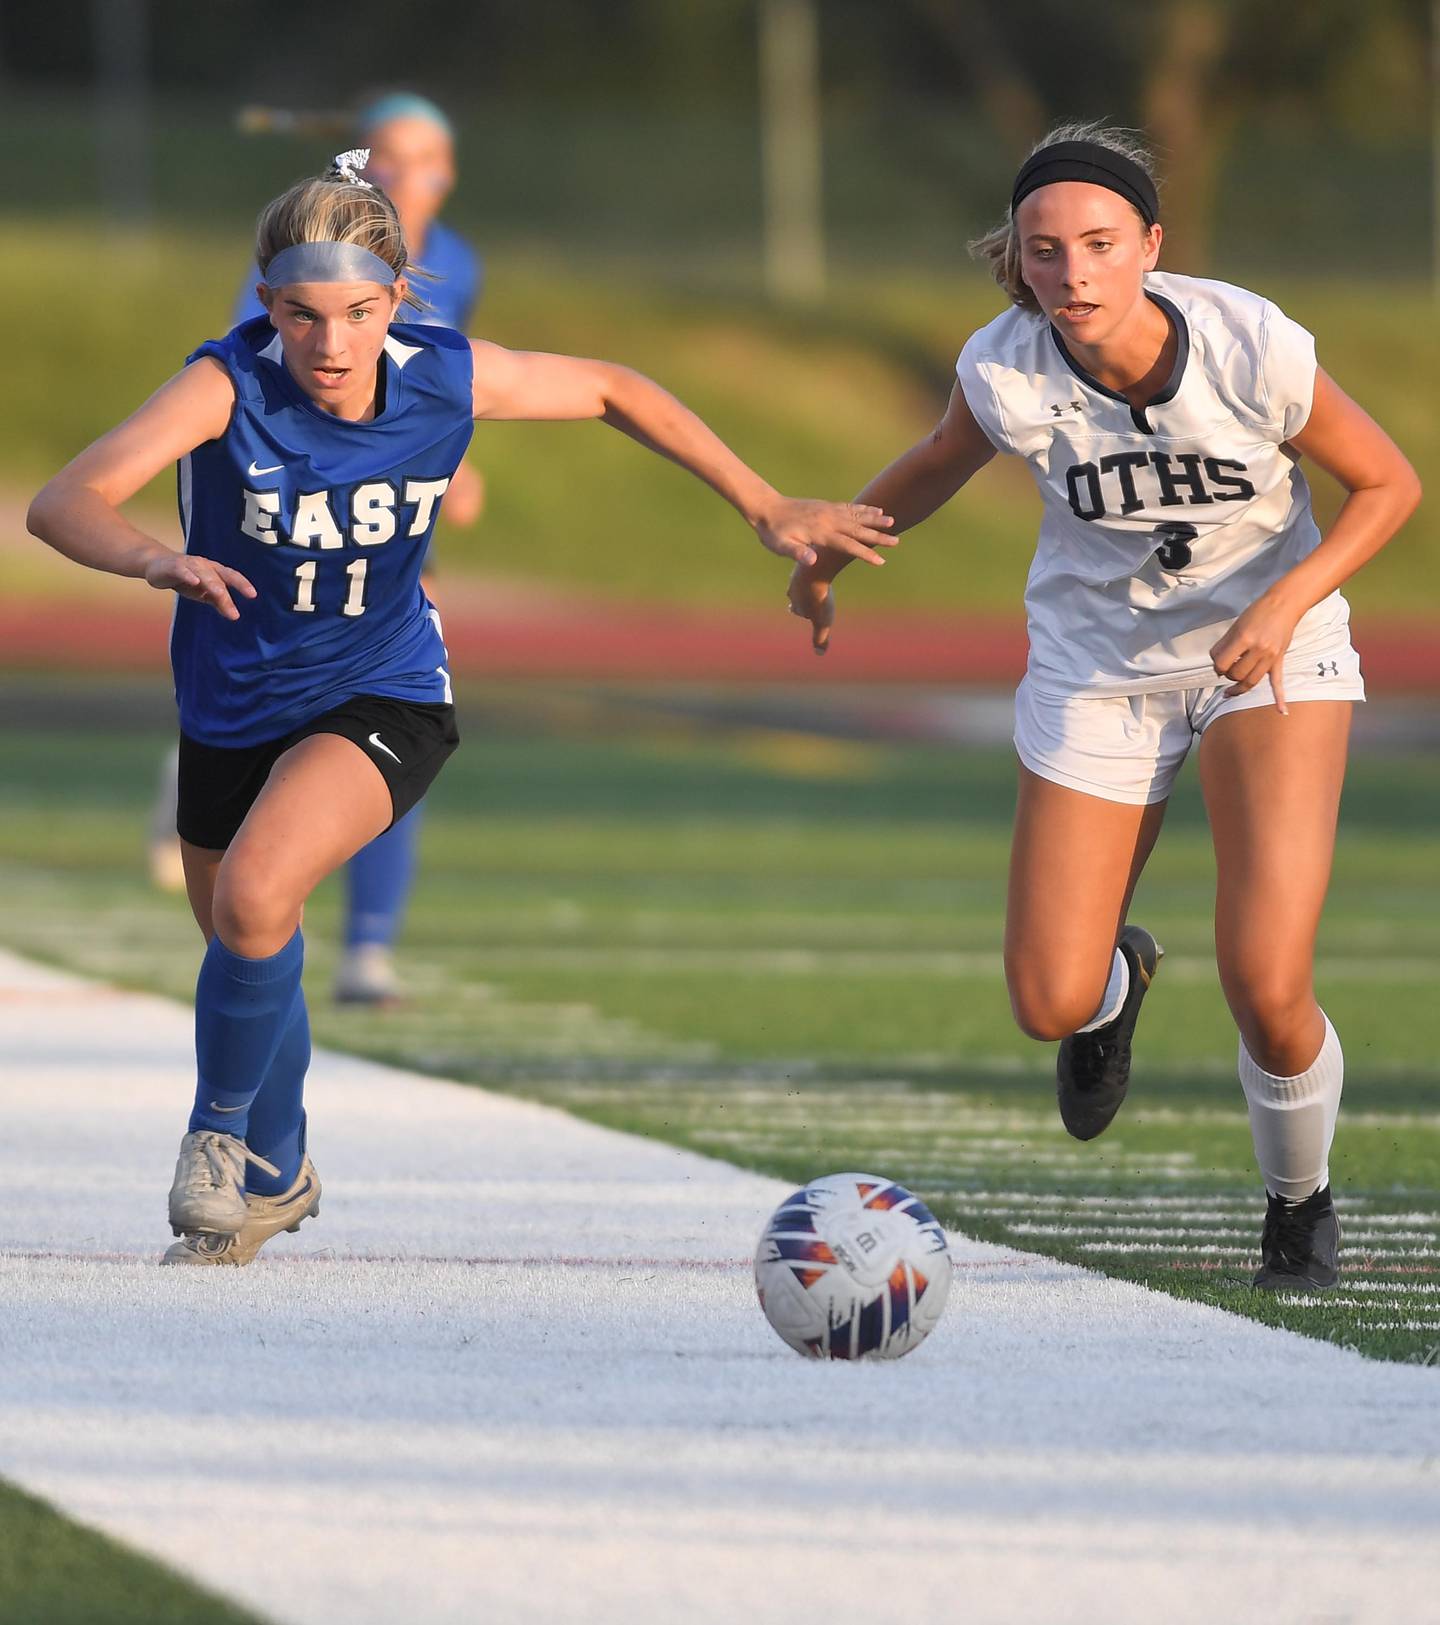 Lincoln-Way East’s Cami Butler and O’Fallon’s Regan Schreckenberg chase the ball in the IHSA girls Class 3A state soccer semifinal game at North Central College in Naperville on Friday, June 2, 2023.